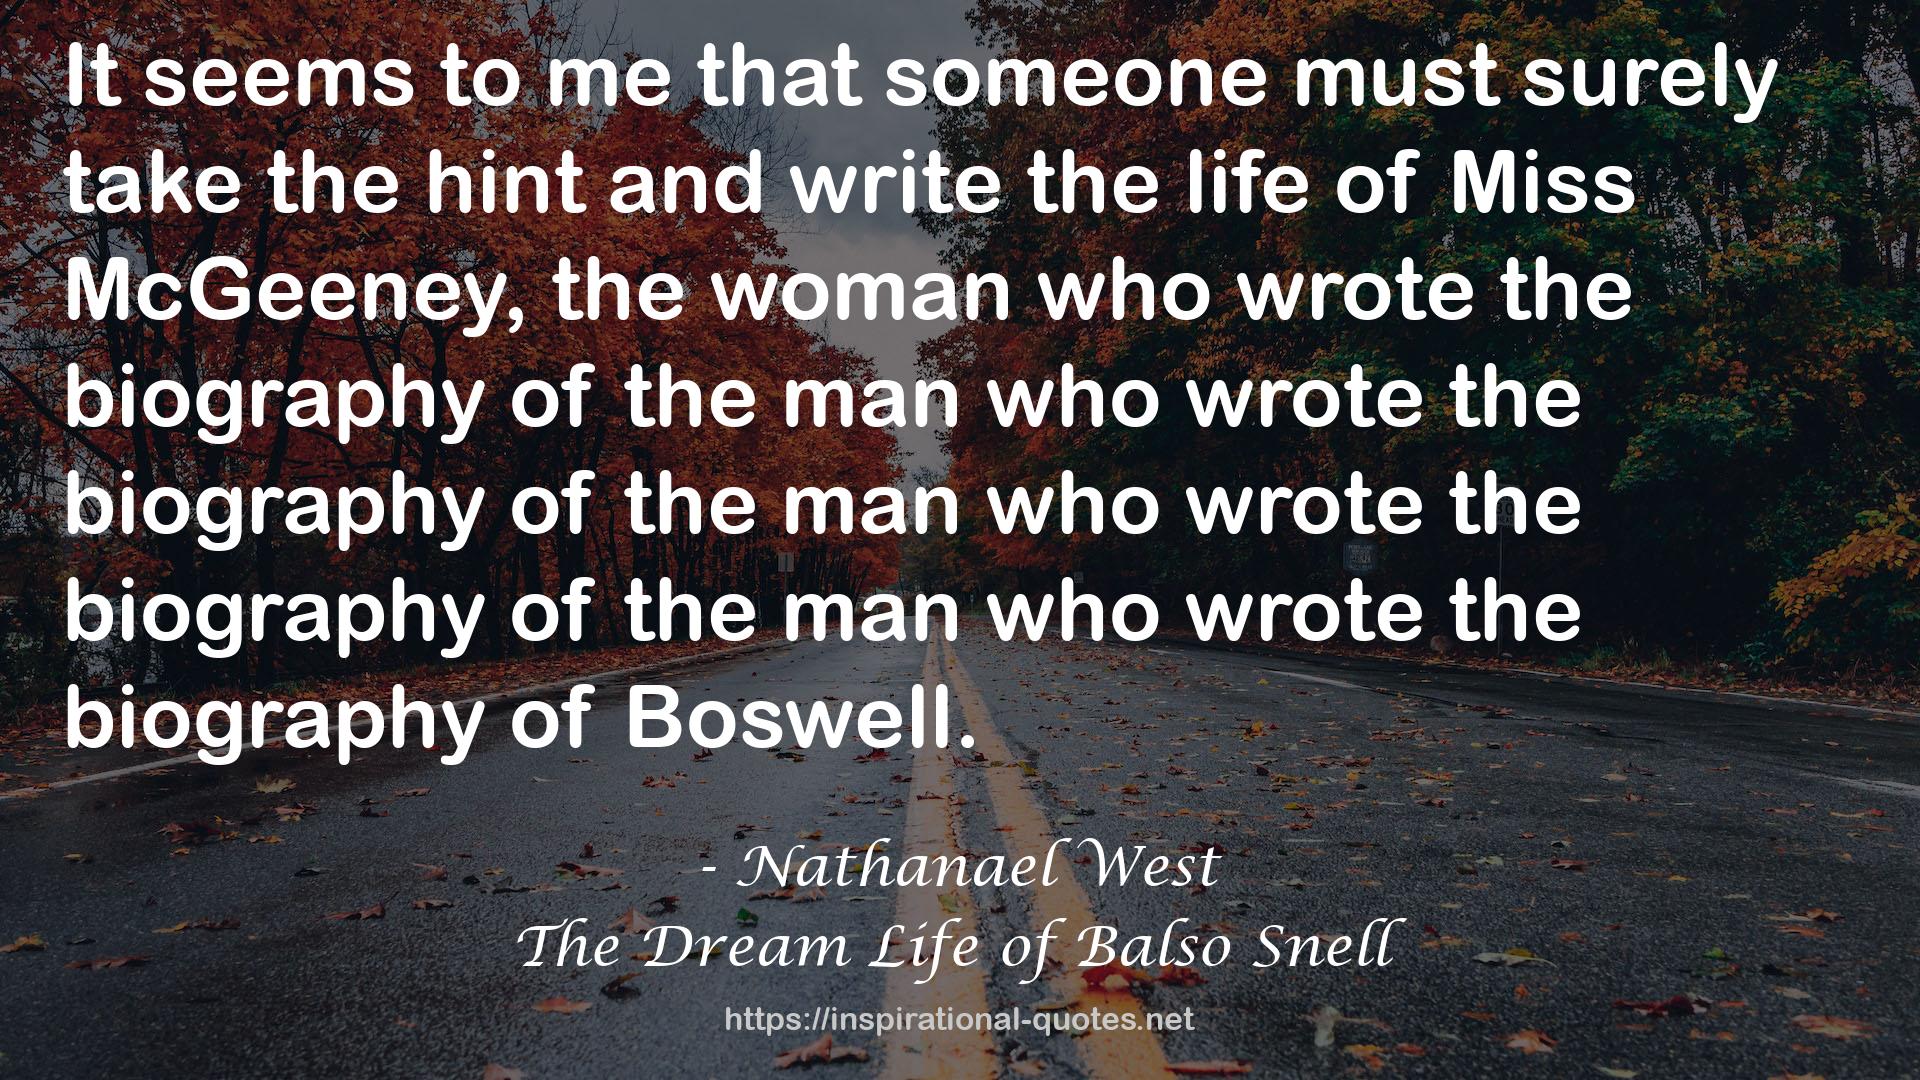 The Dream Life of Balso Snell QUOTES